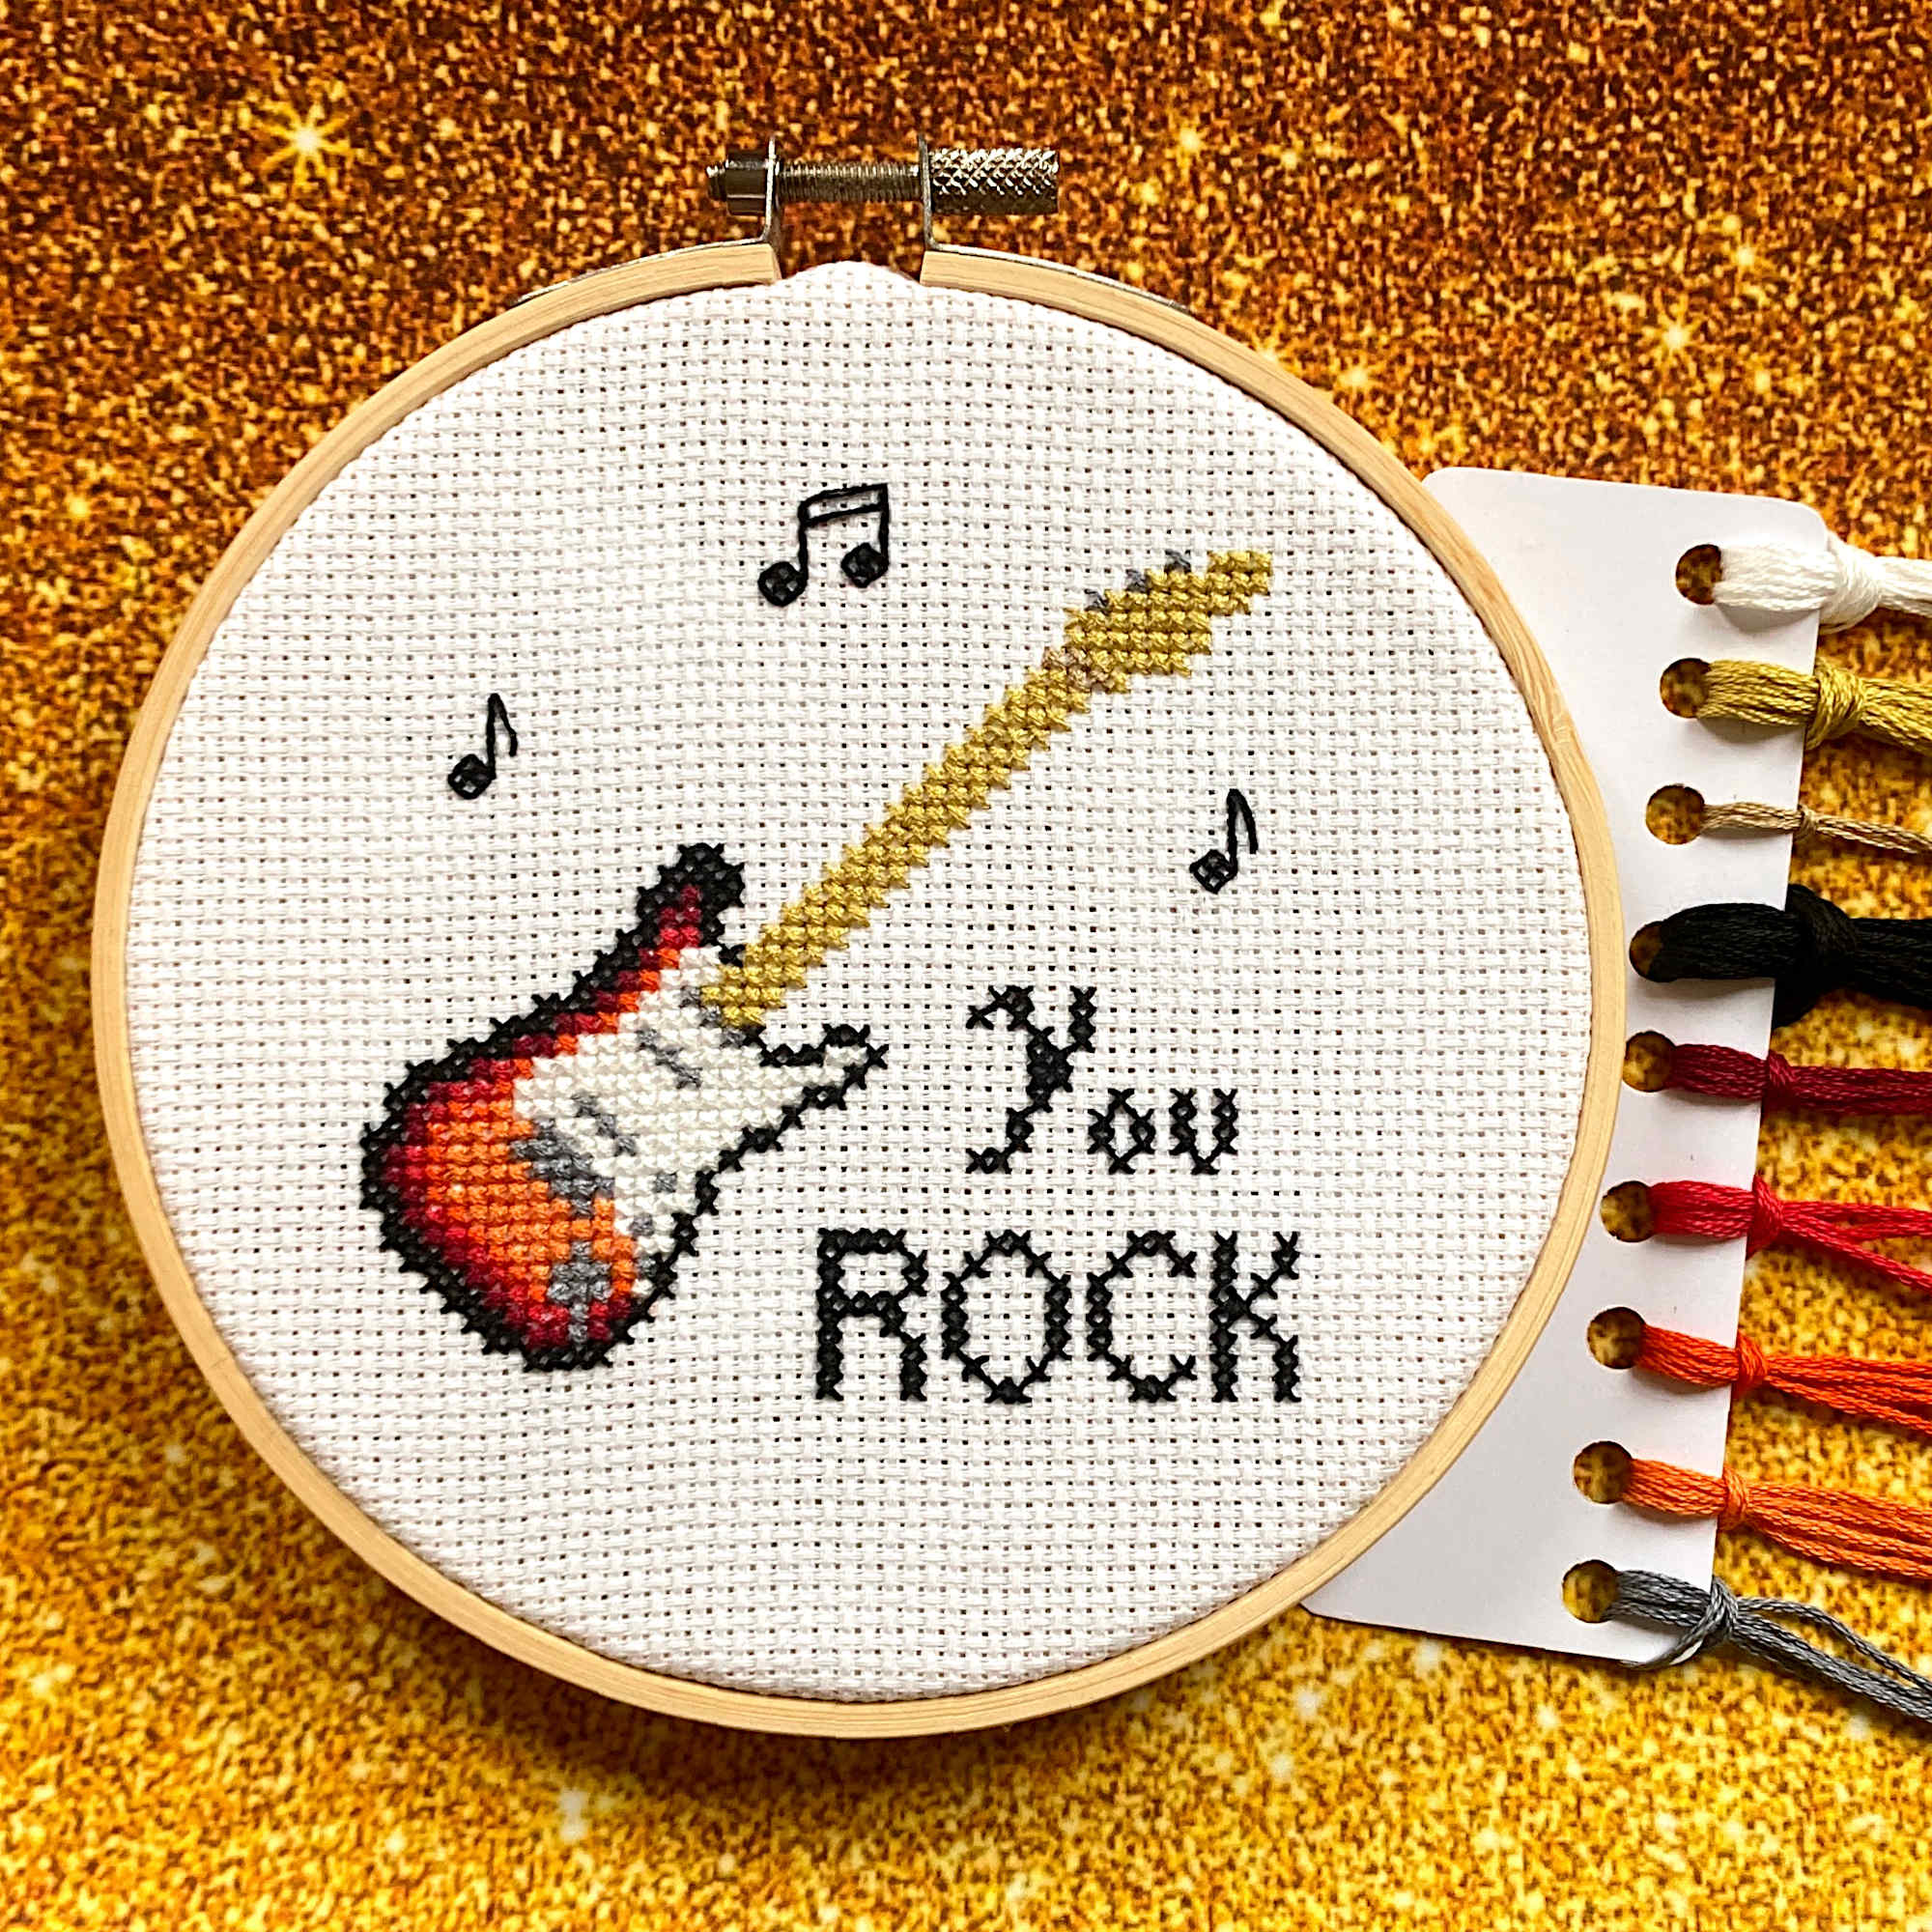 Guitar Cross Stitch with "you rock" caption and musical notes